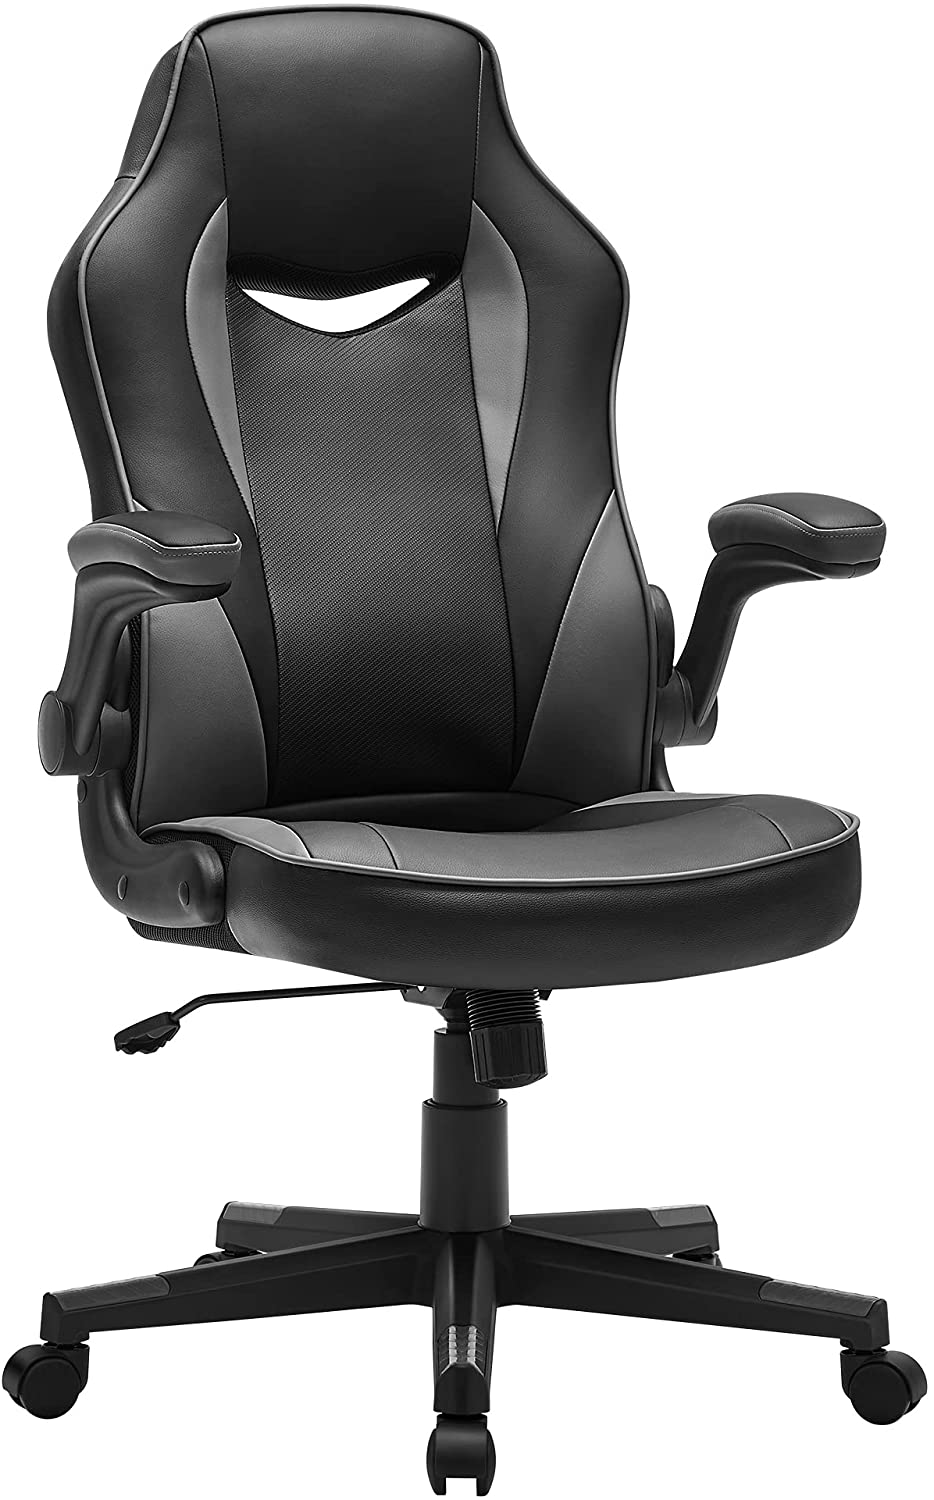 Nancy's Cooperage Office chair - Swivel chair - Ergonomic - Height adjustable - Faux leather - Plastic - Black 0 75 x 64 x (110-120) cm 